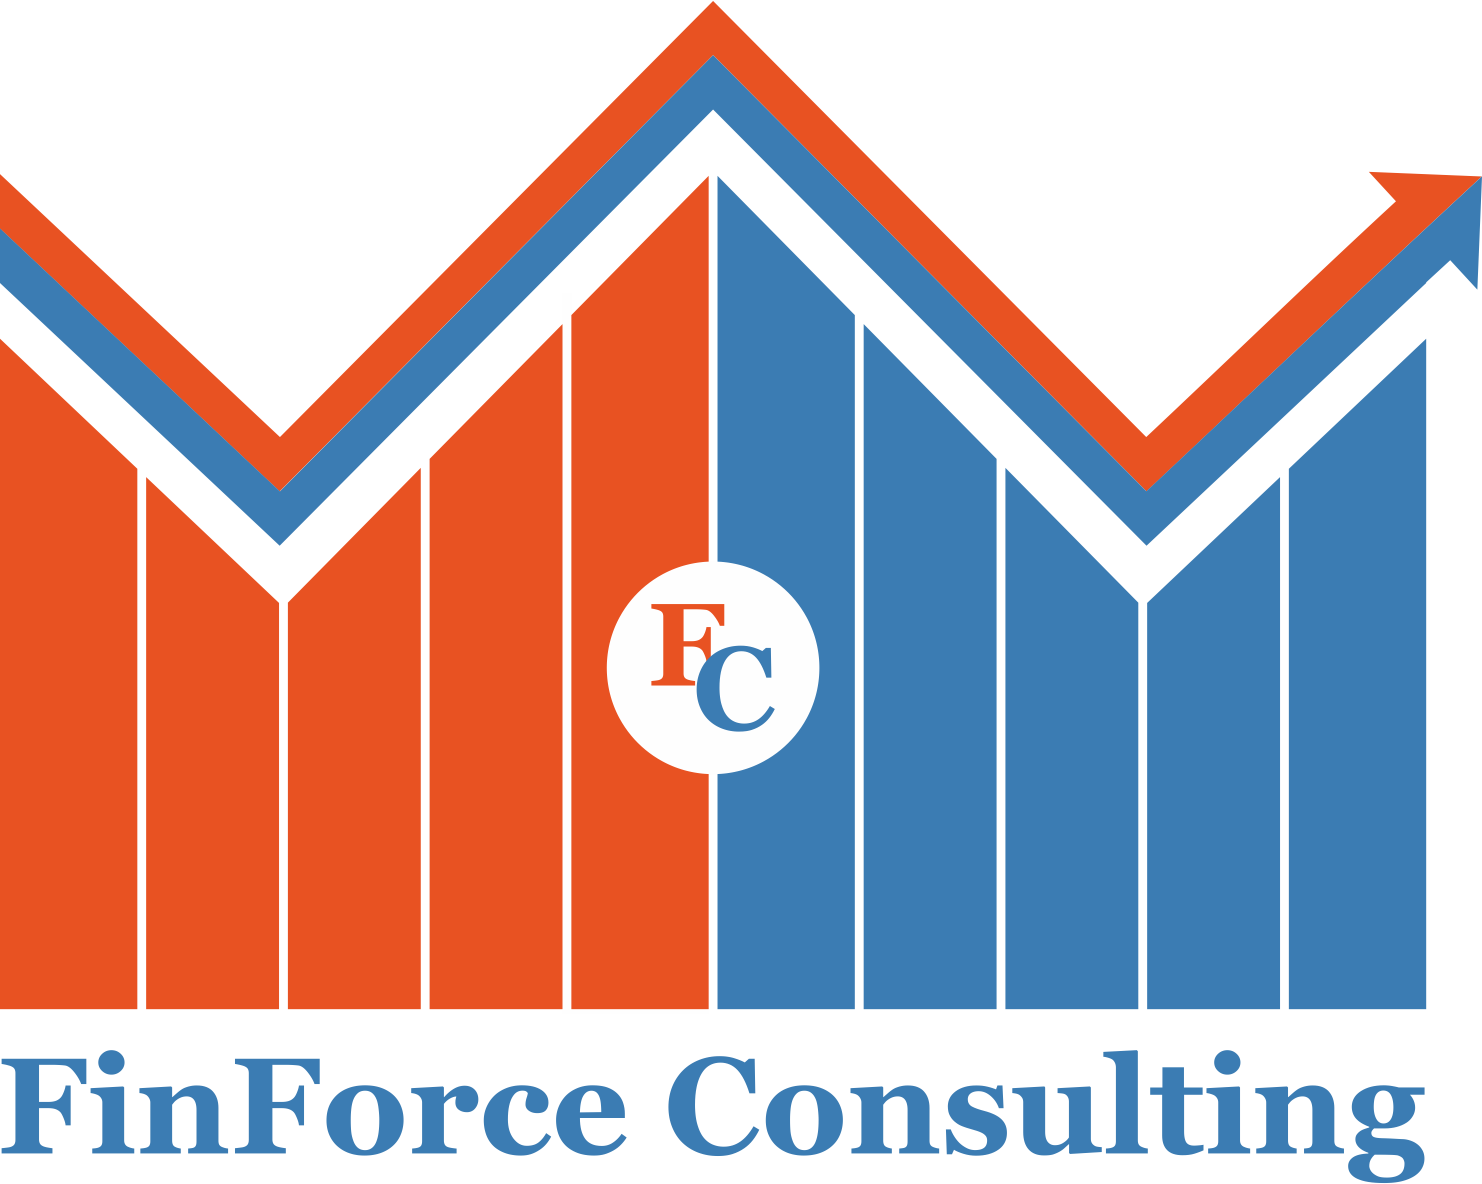 FinForce Consulting